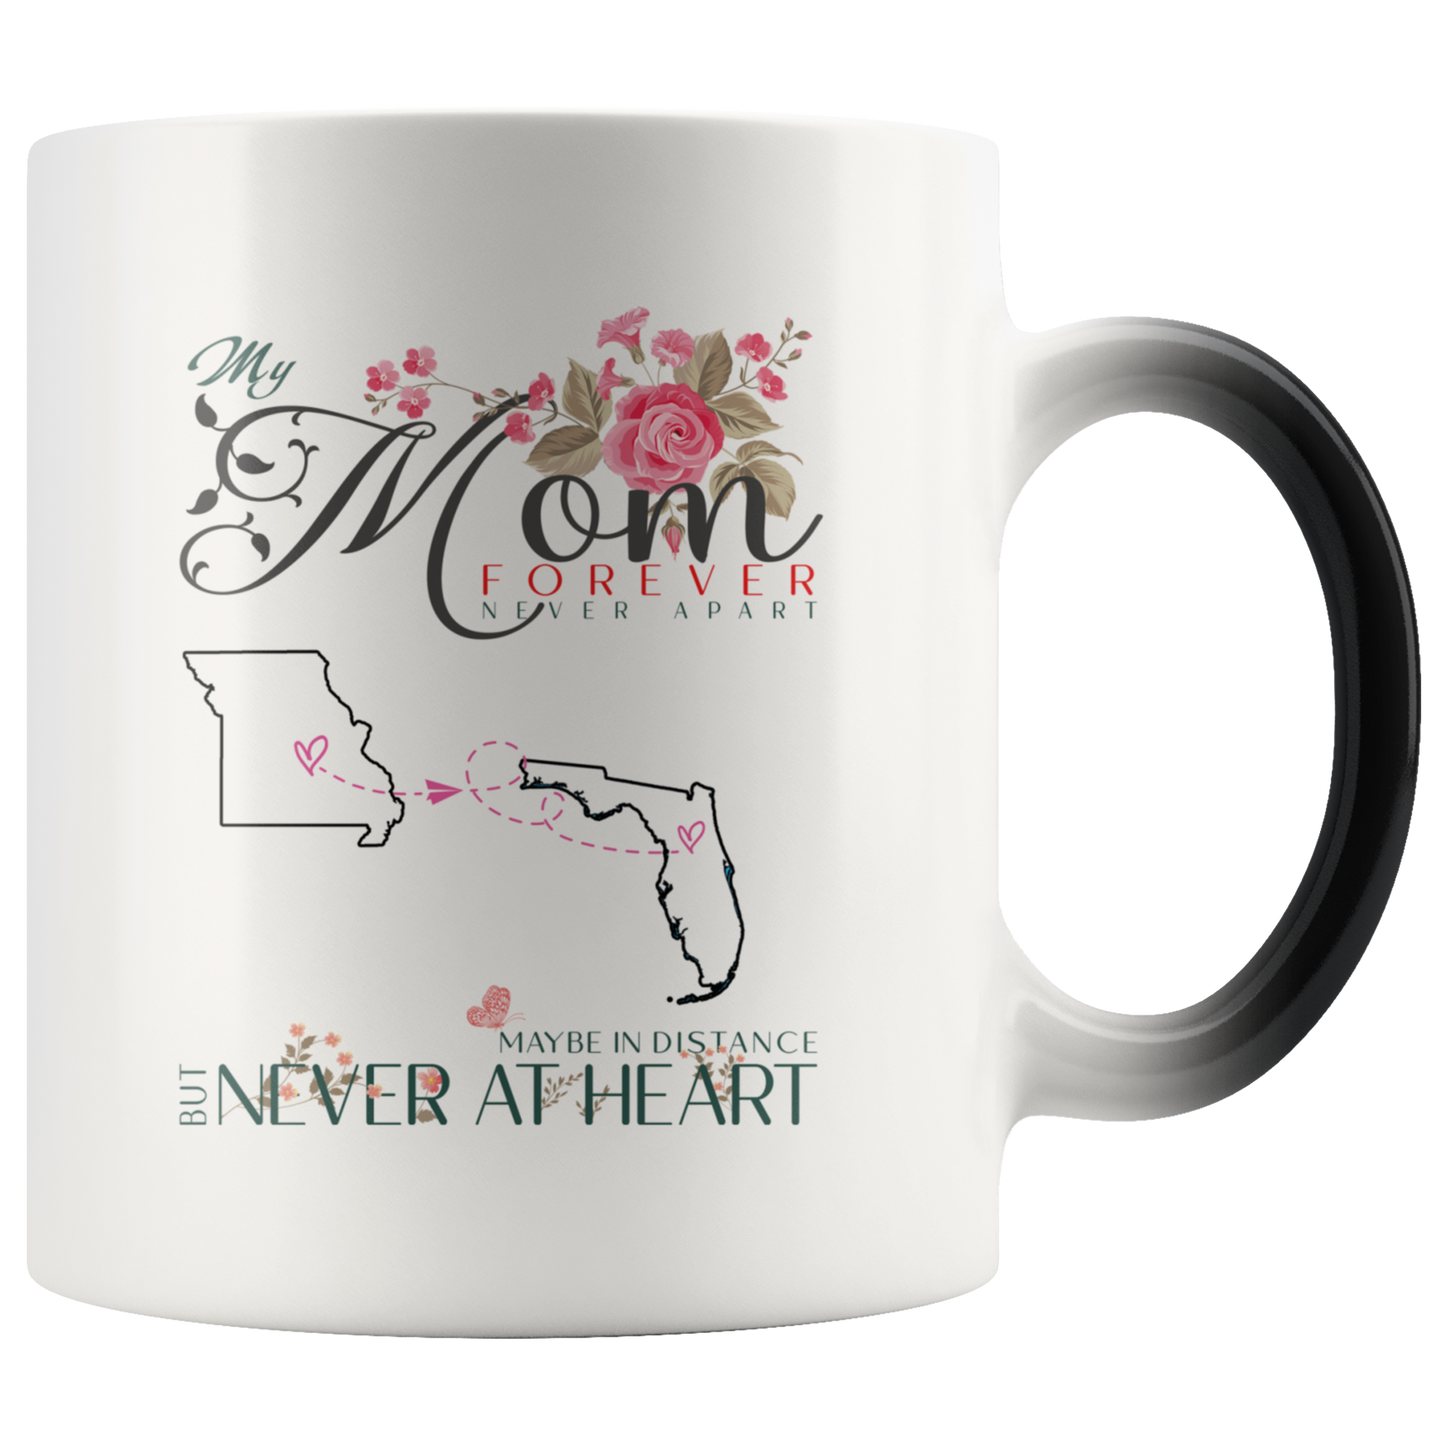 M-20321571-sp-23675 - [ Missouri | Florida ]Personalized Mothers Day Coffee Mug - My Mom Forever Never A